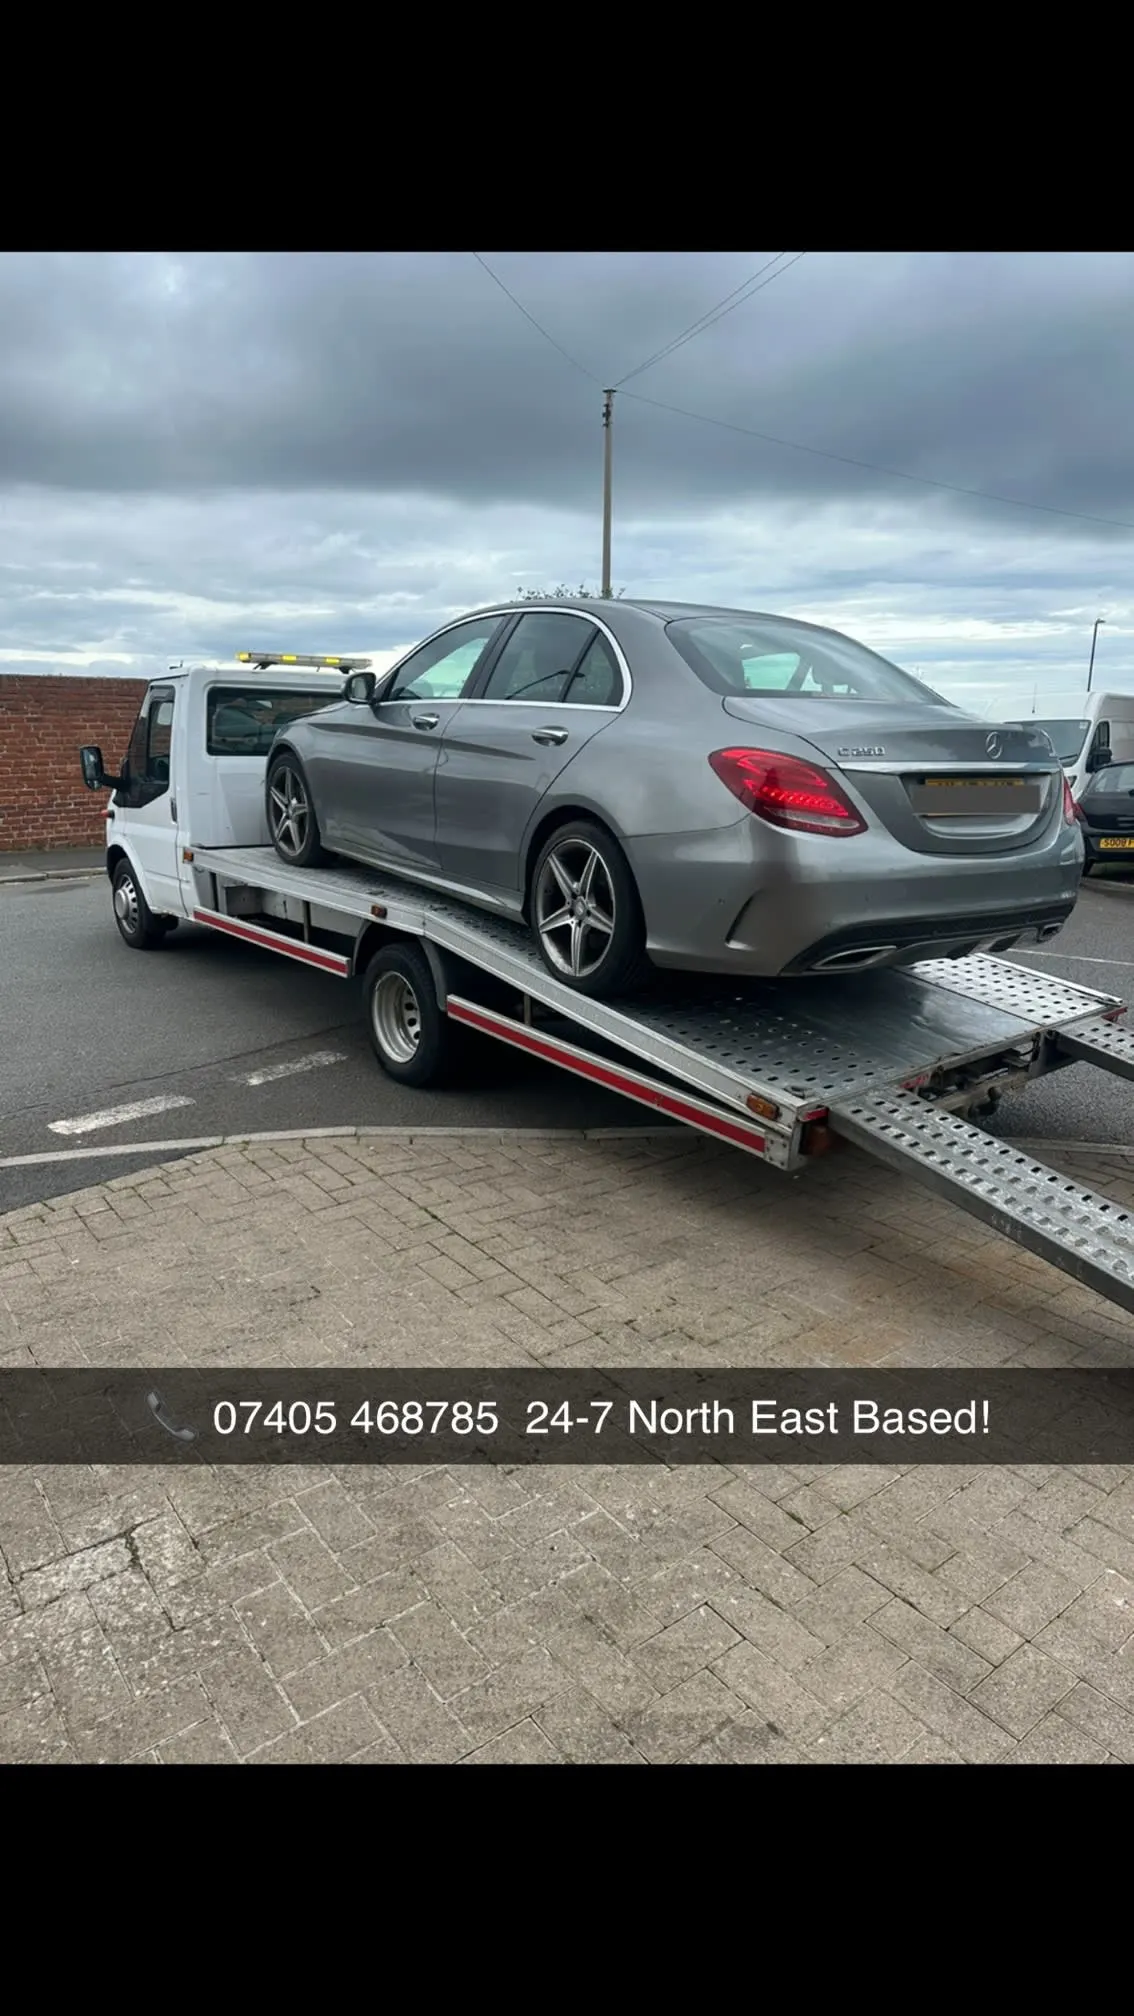 S Brothers Transport & Recovery Sunderland 07405 468785